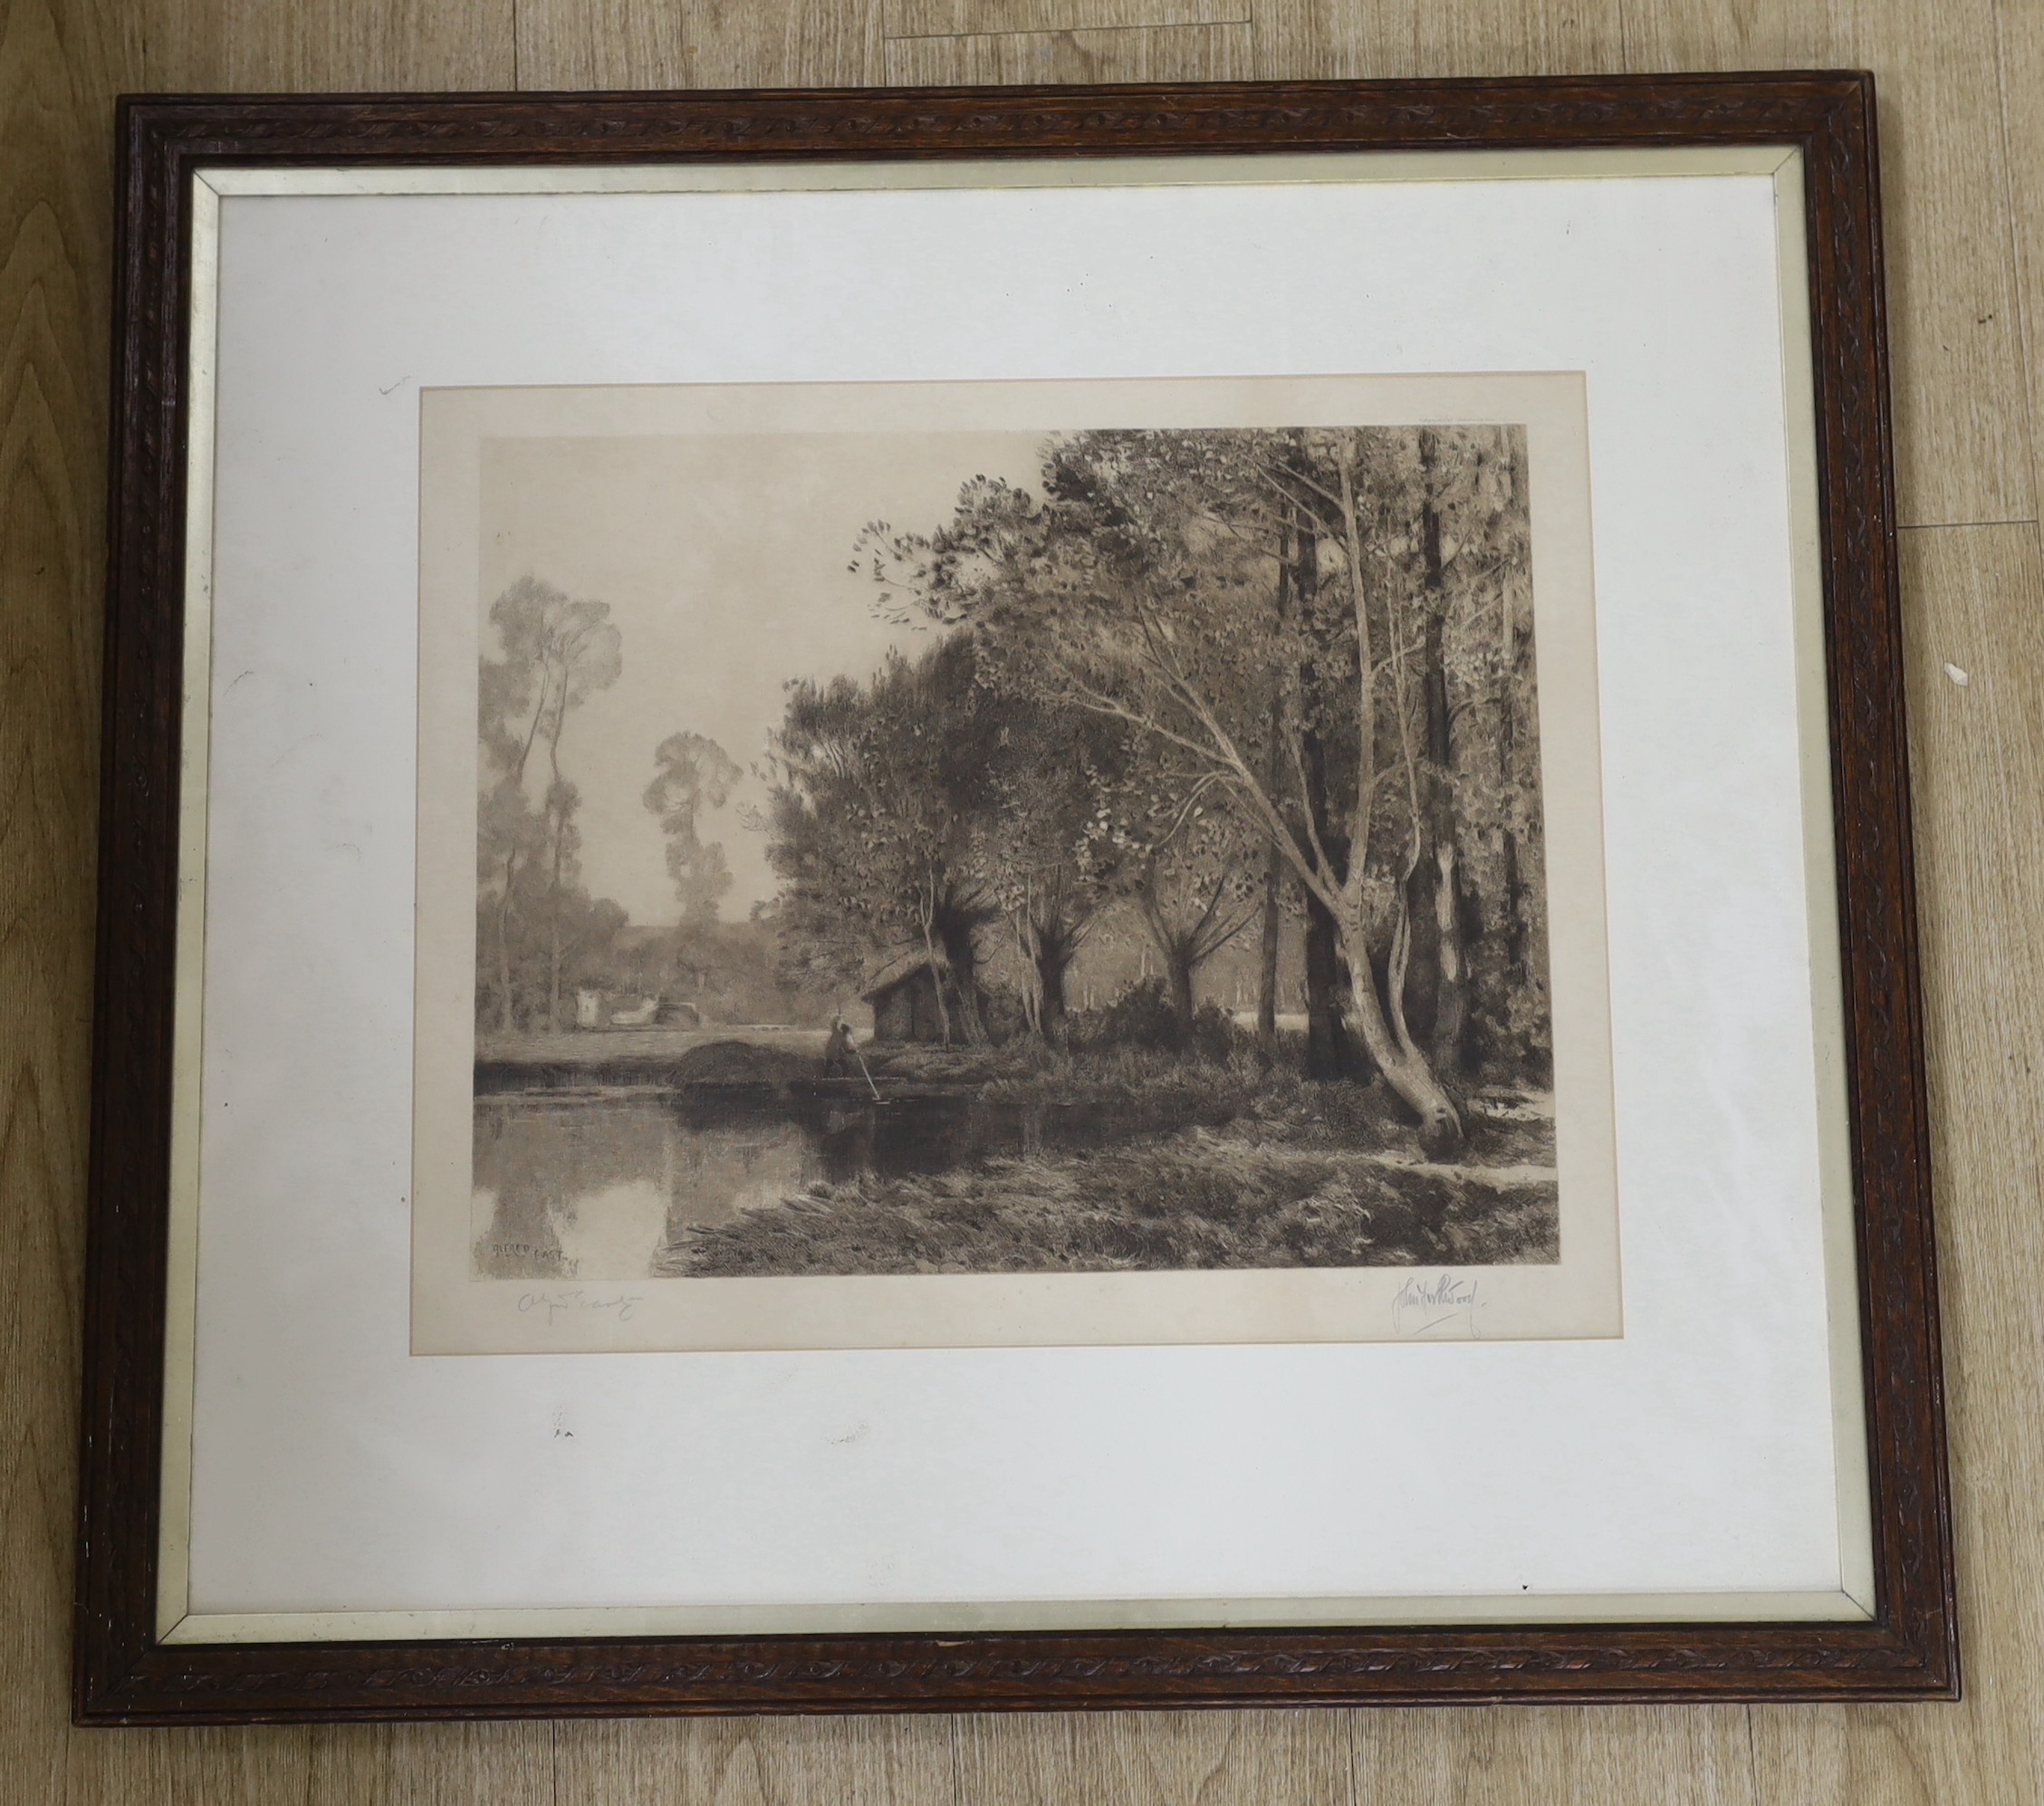 John Wood after Sir Alfred East, engraving, Boatman in a landscape, signed by both artists, 46 x 55cm